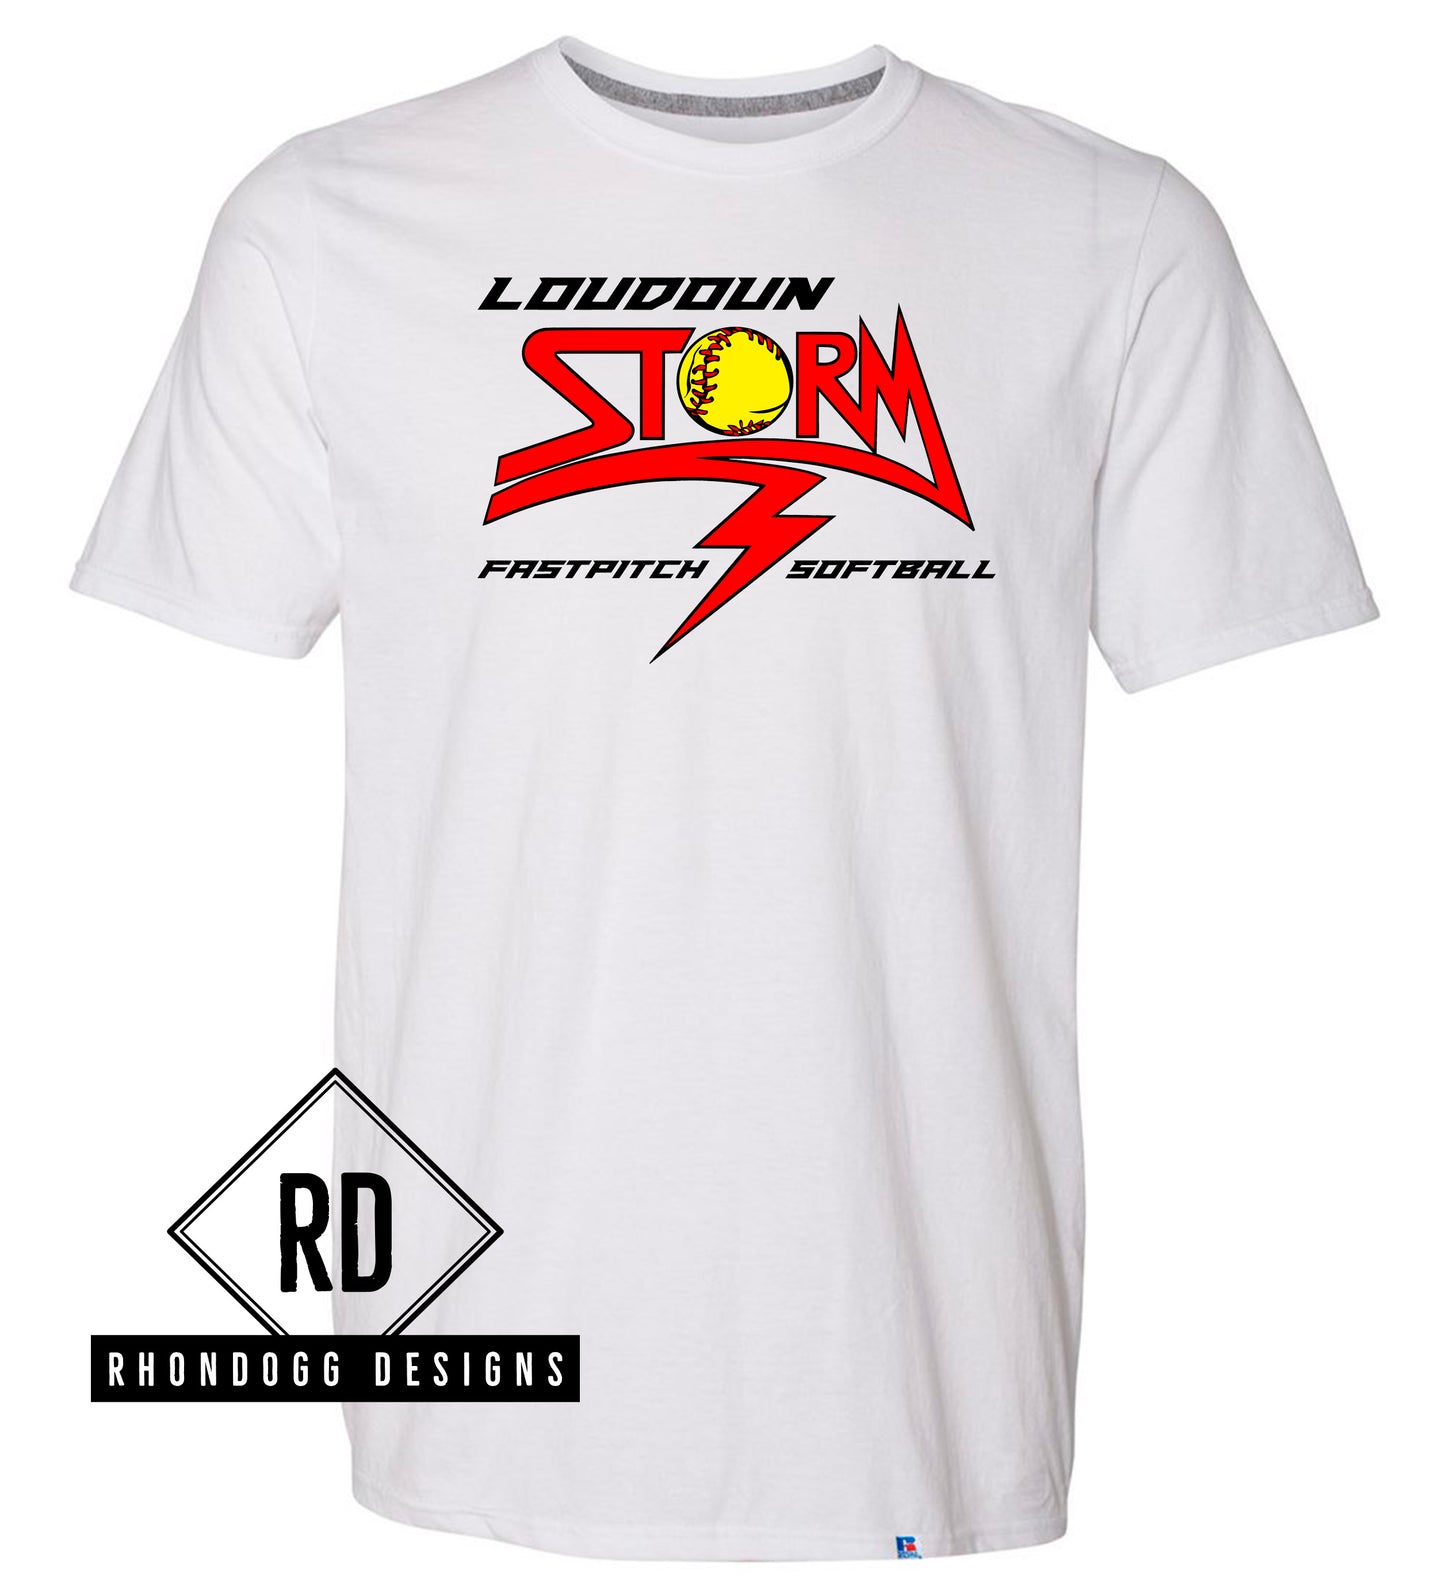 Russell Athletic Loudoun Storm Cotton/Polyester T-Shirt